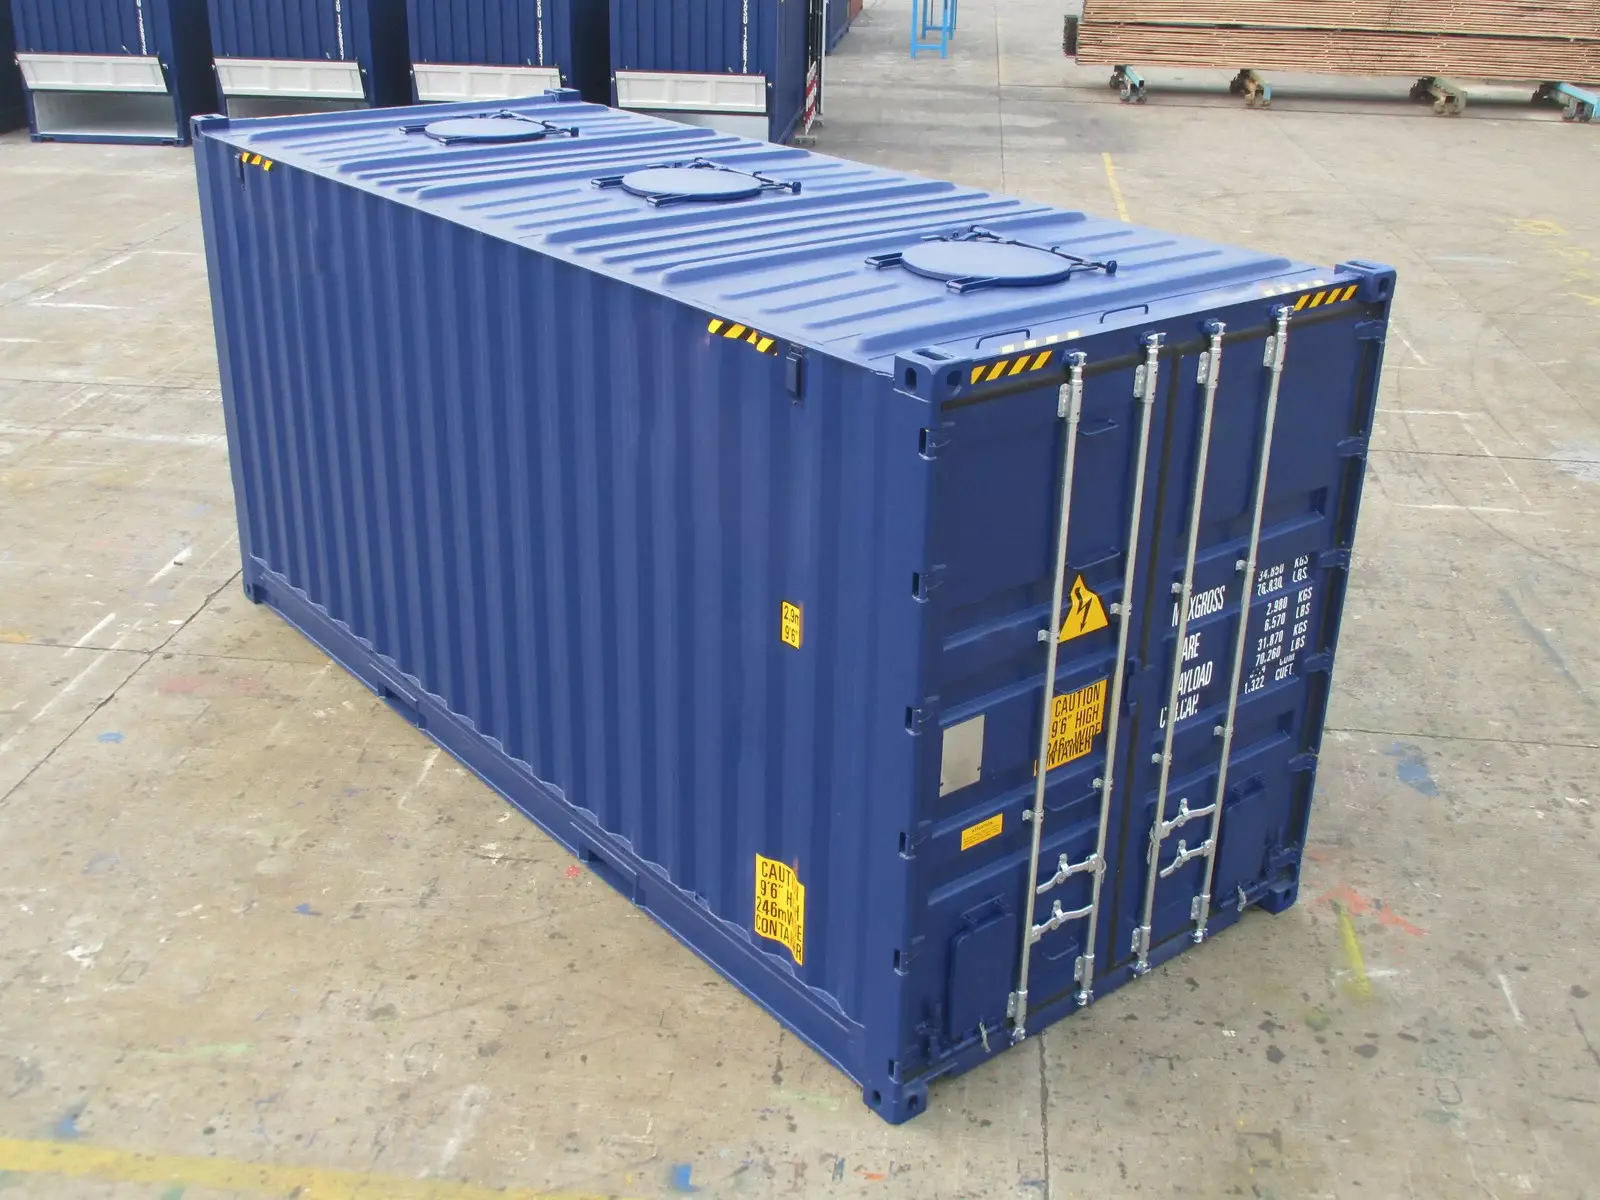 Shipping Containers For Sale in Folsom